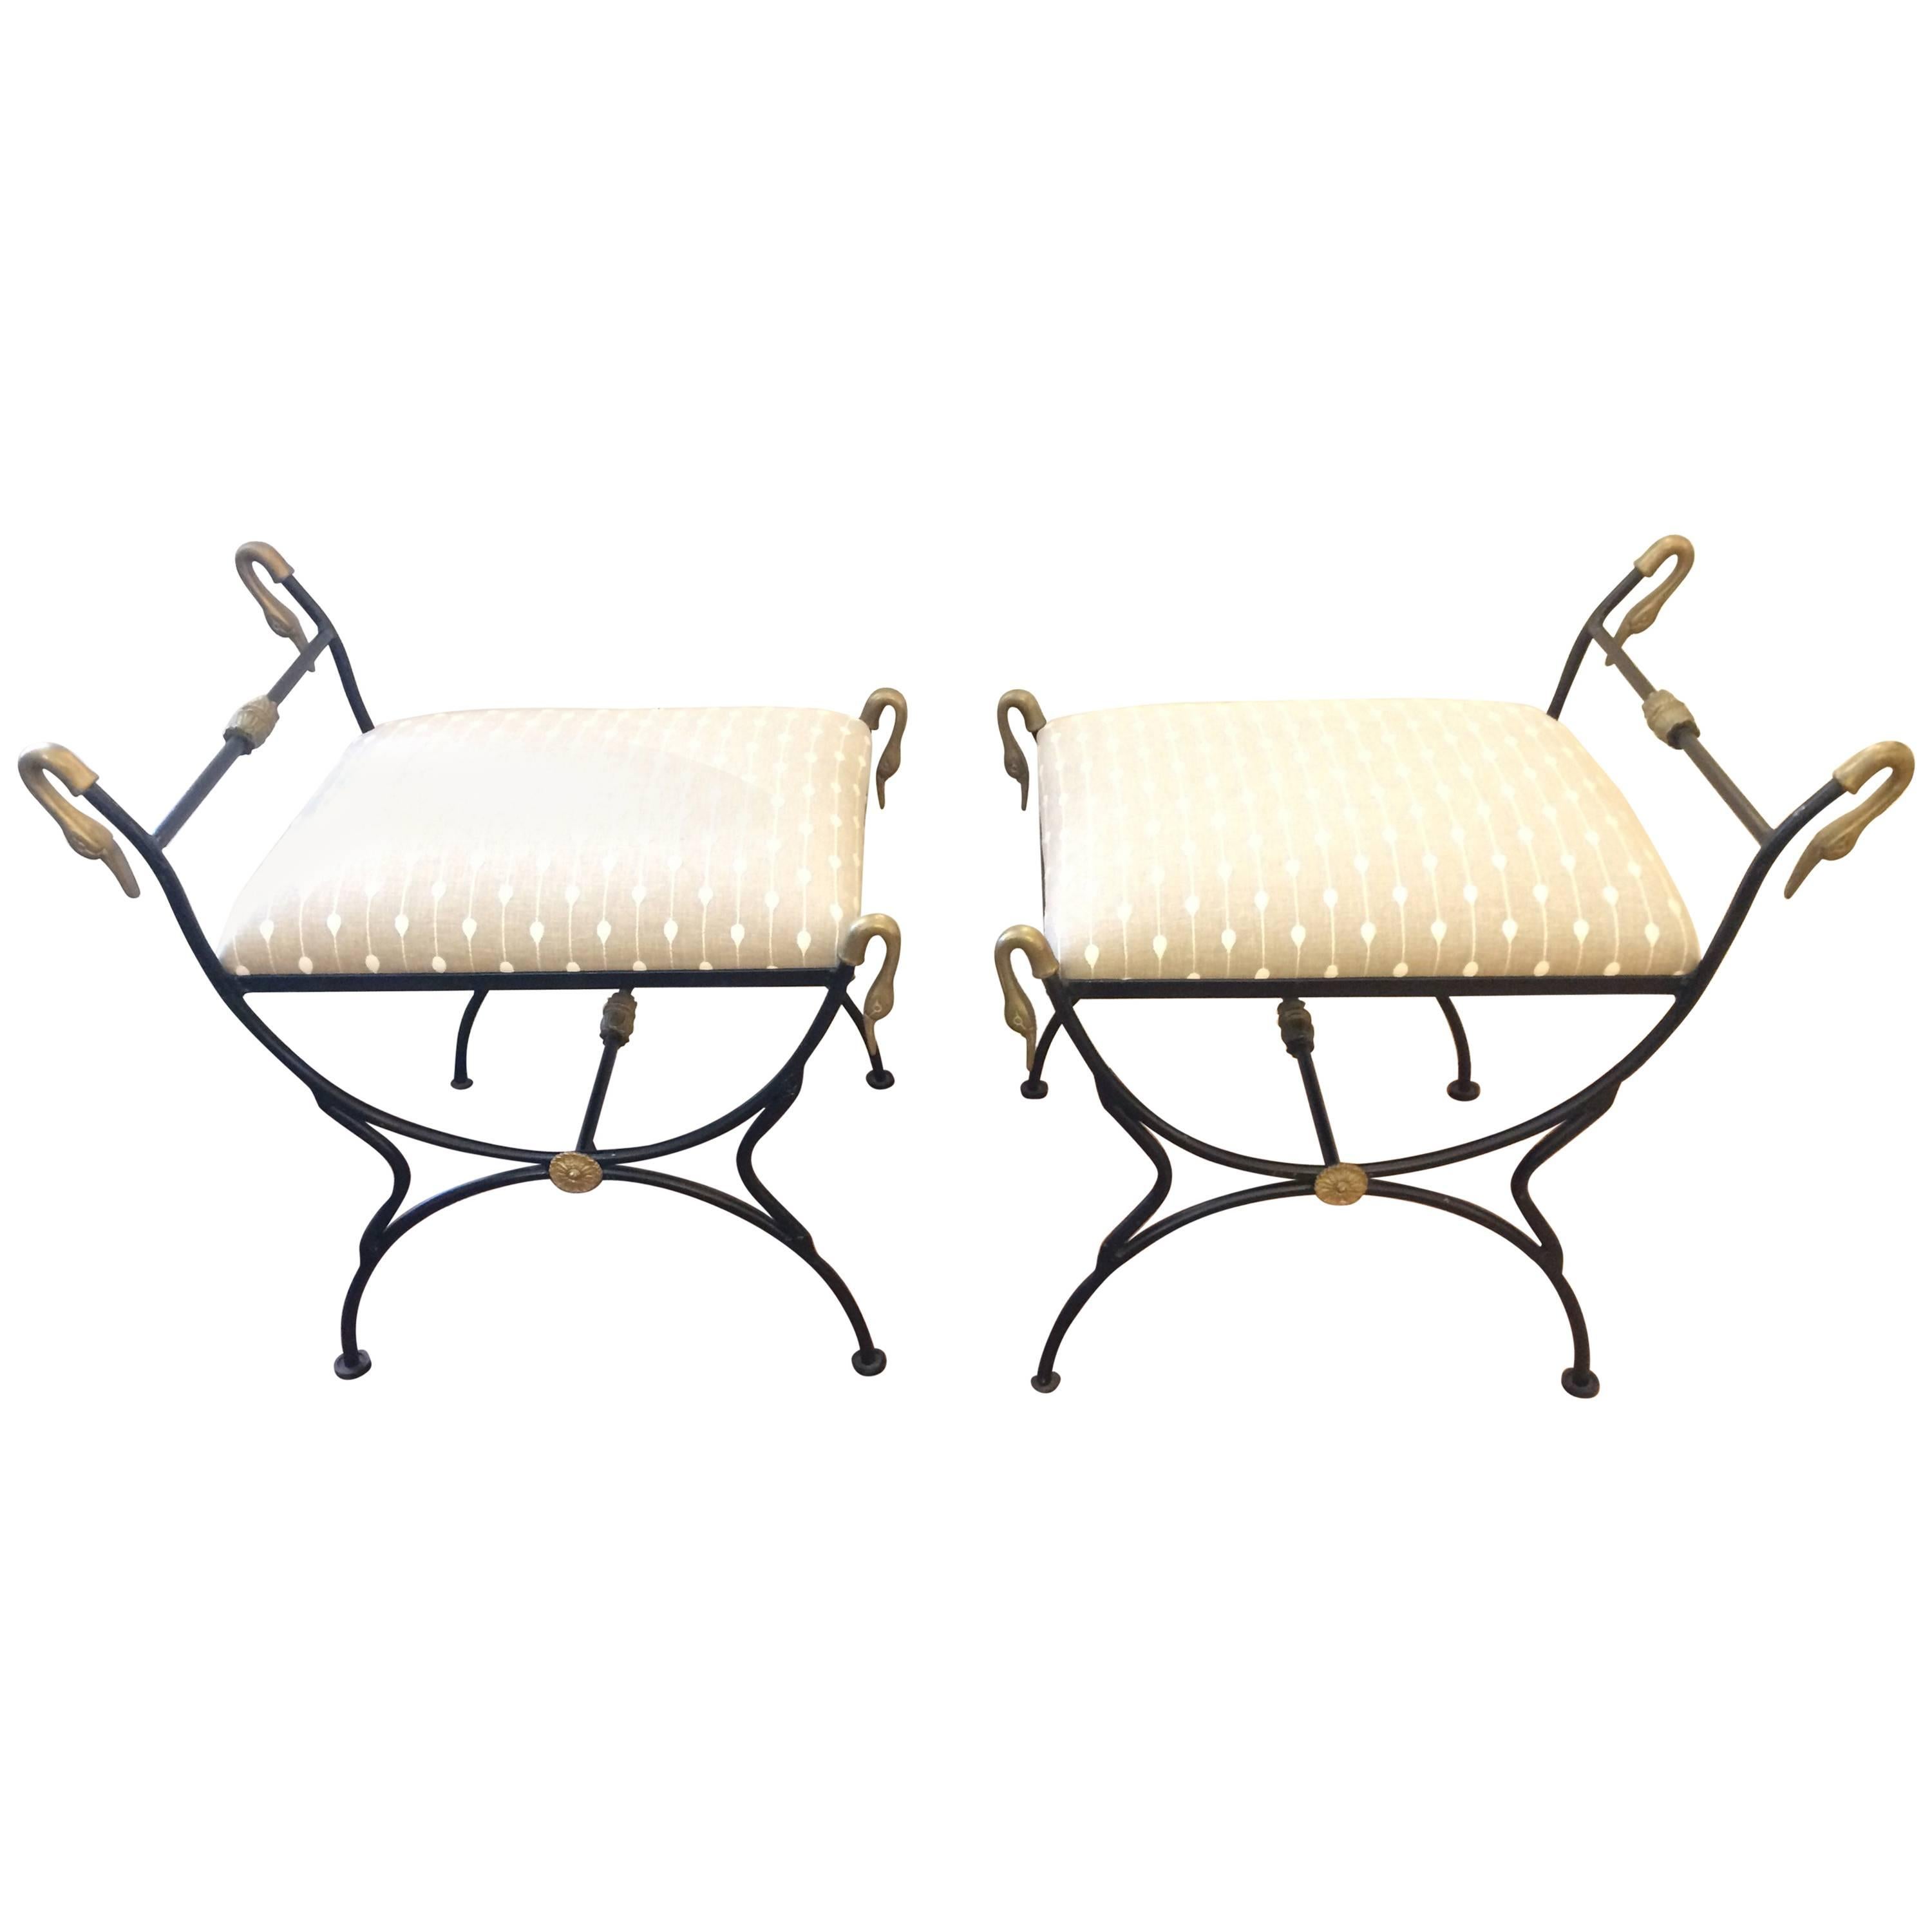 Pair of Iron and Brass Swan Motife Bench Ottomans